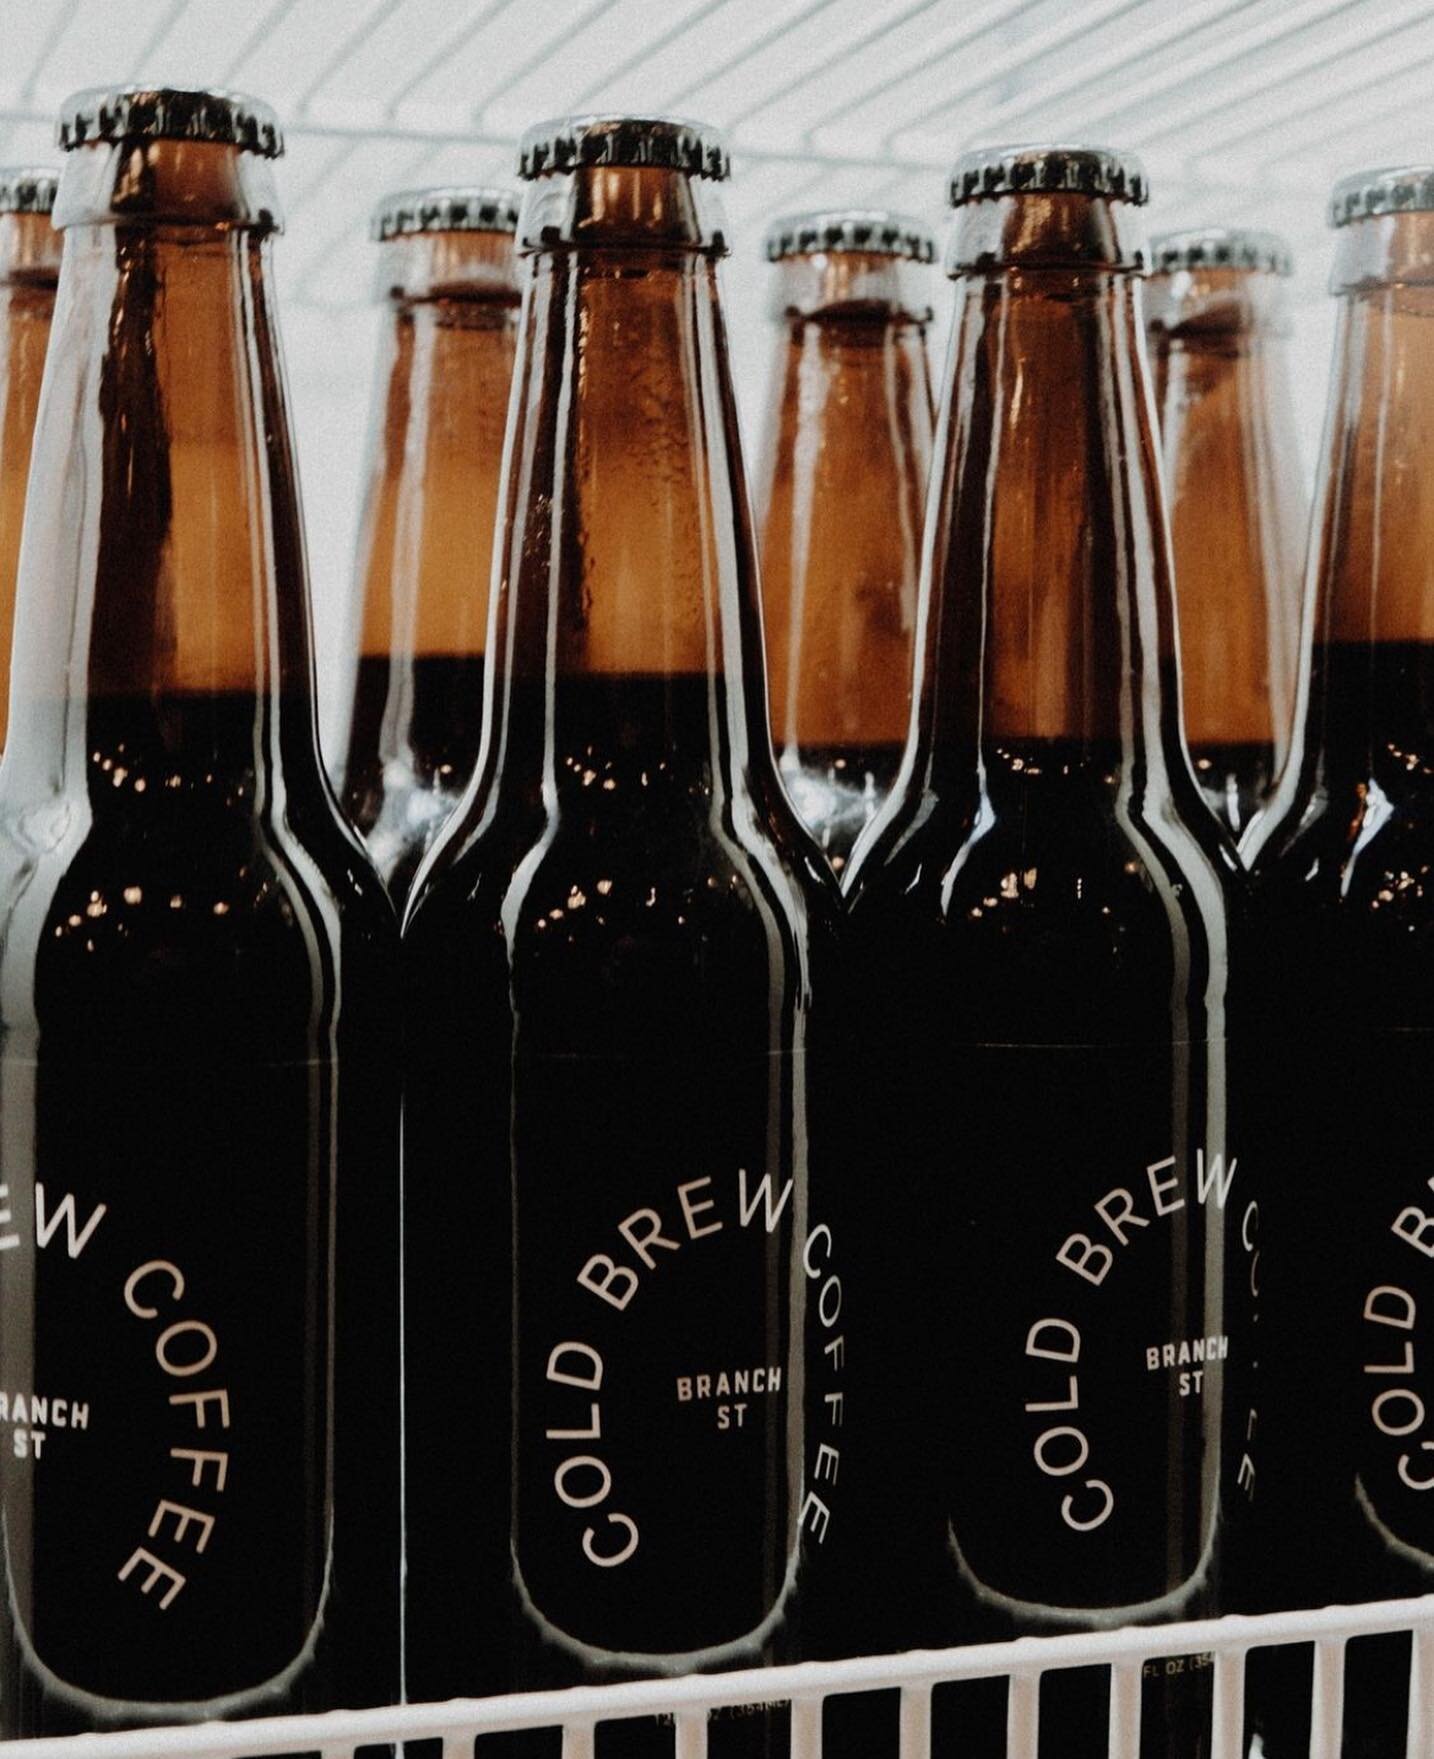 beat the heat w/ @branchstreetcoffee cold brew! bottles designed by me 👏🏻 [ft. clear labels w/ white design + special thumb labels that overlap the cap for single origin offerings]
&ndash;
photo by @robbiefaix